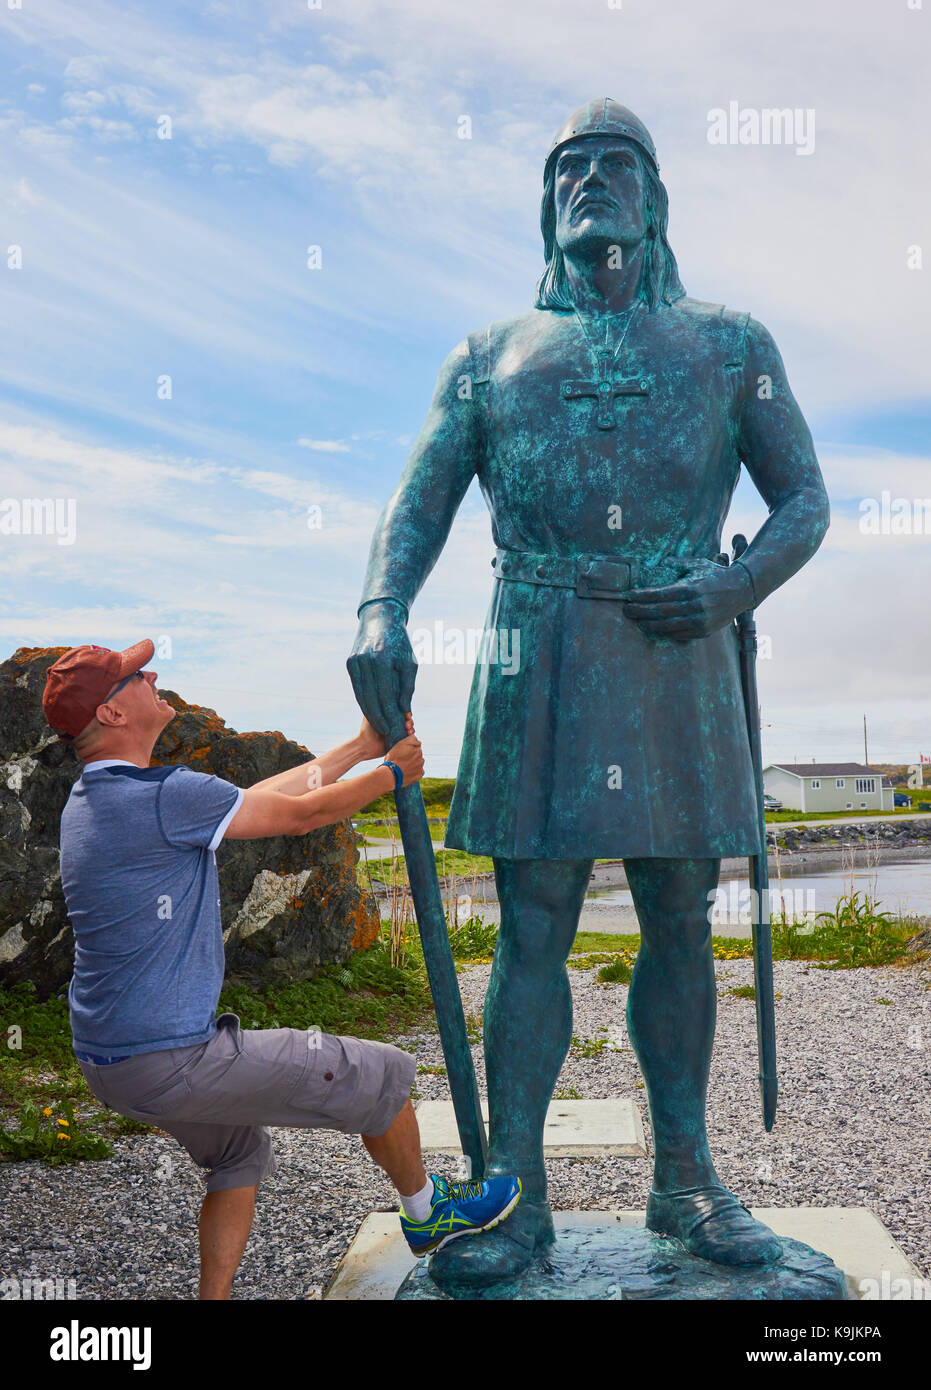 Middle aged male Swedish tourist looking up at 10 foot high bronze statue of Leif Erikson by Phillip Levine,  L'Anse Aux Meadows, Newfoundland, Canada Stock Photo